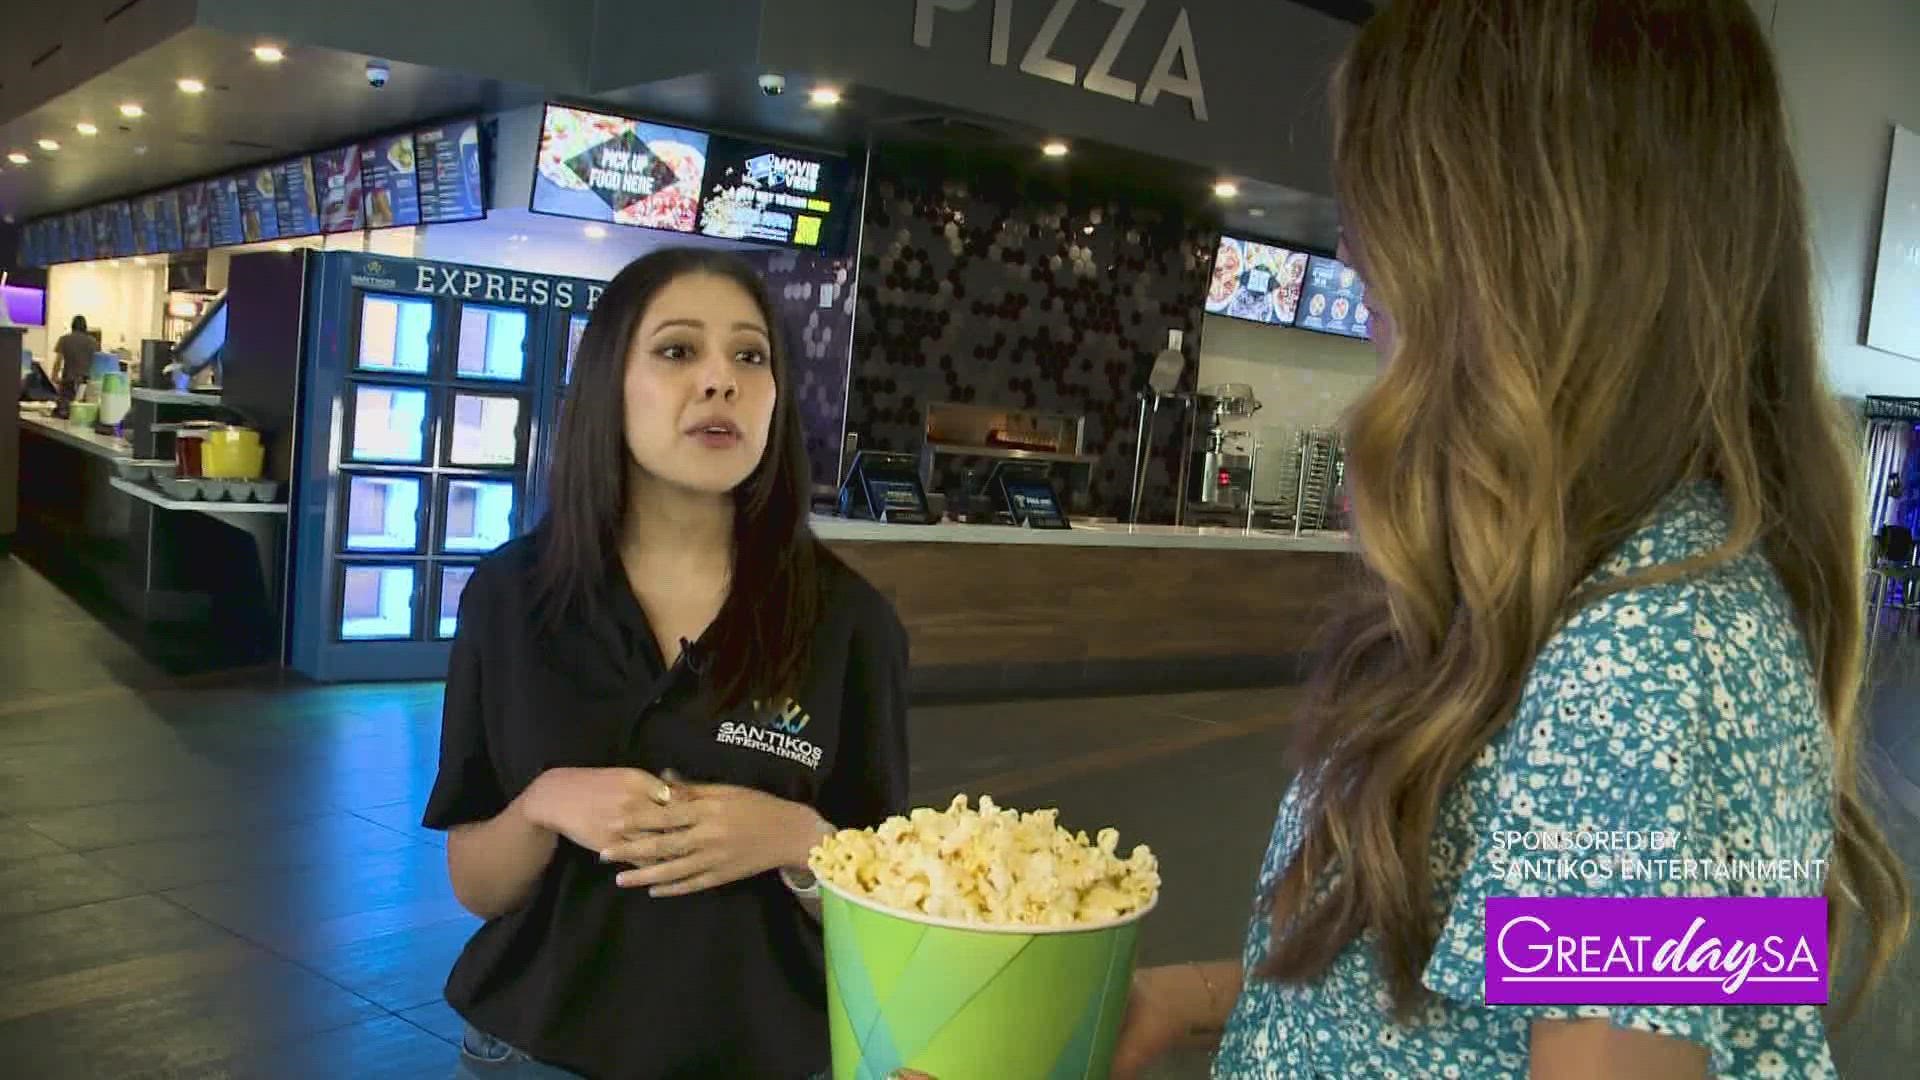 Santikos in Cibolo is offering much more than just movies! Enjoy their food, arcade and bowling alley as well! Segment sponsored by Santikos Entertainment.